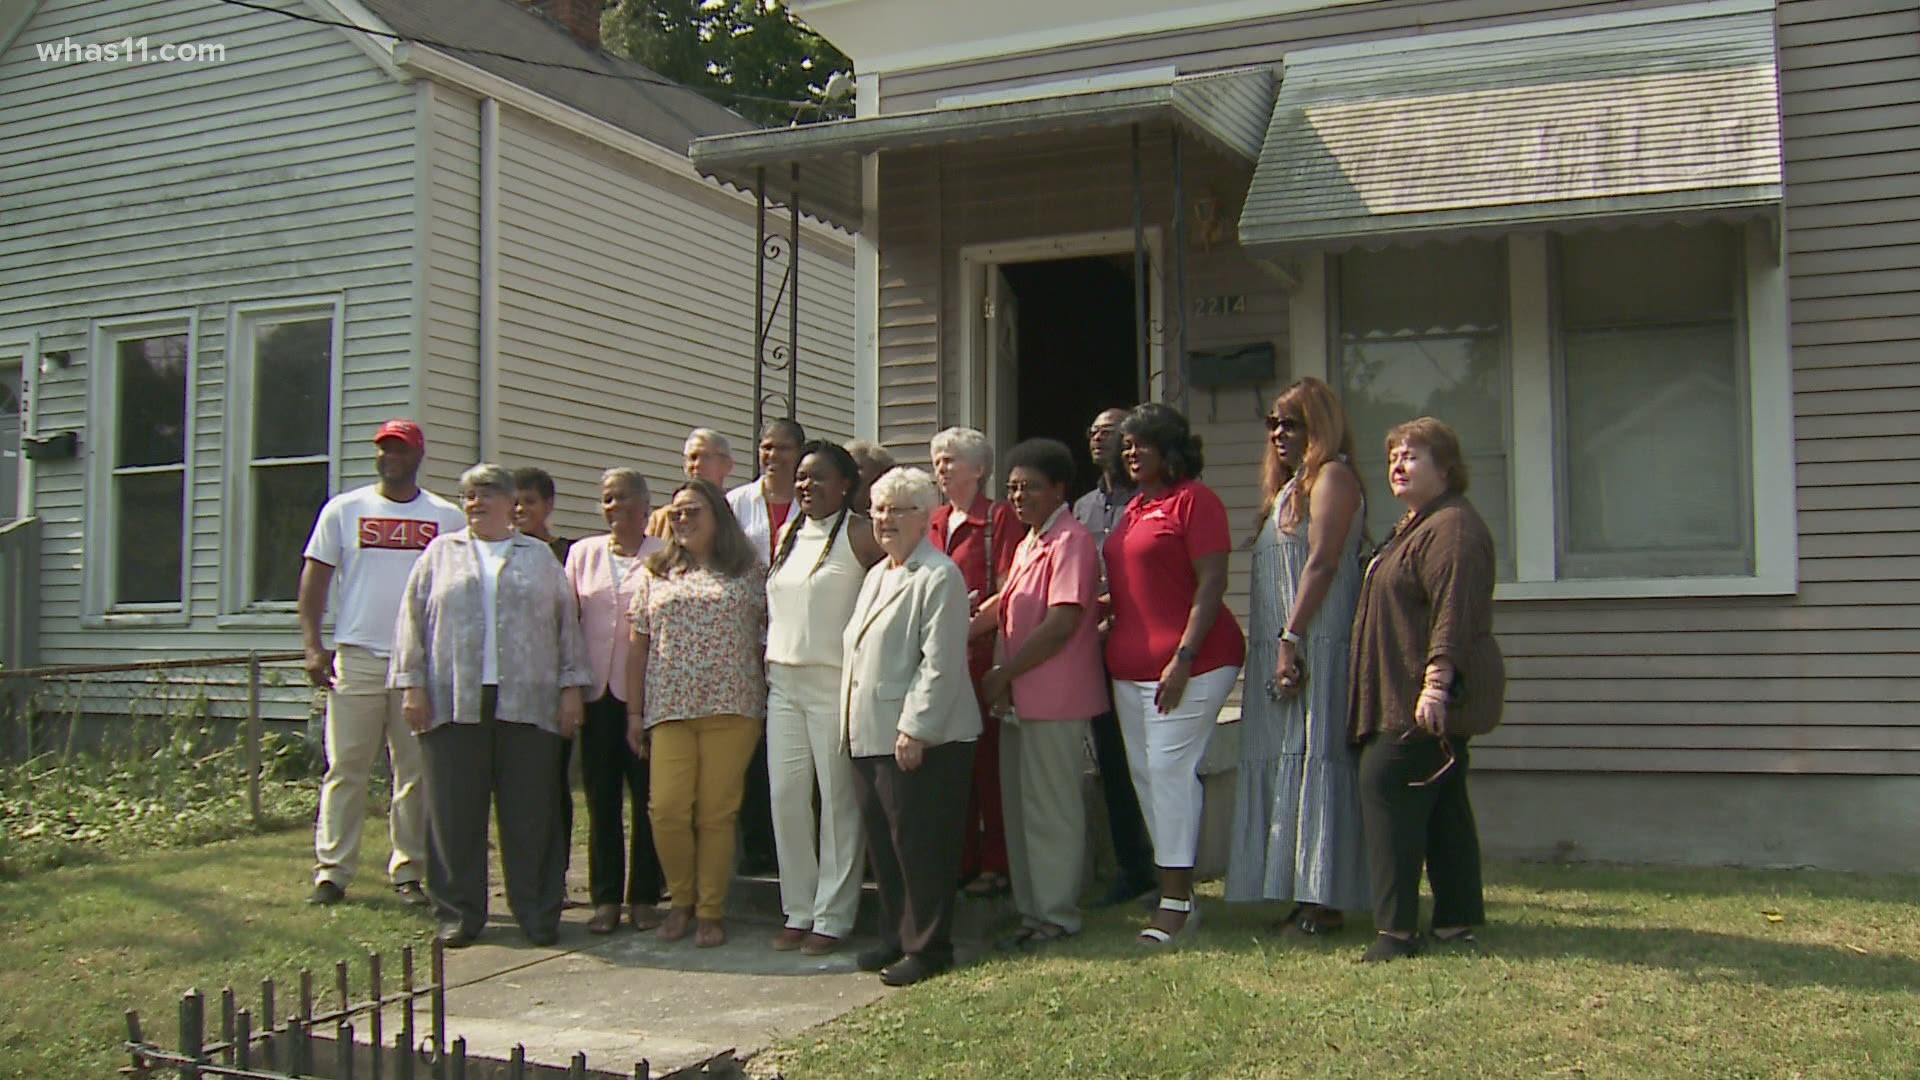 The money will be spent renovating 50 vacant homes and properties to create affordable housing in West Louisville.